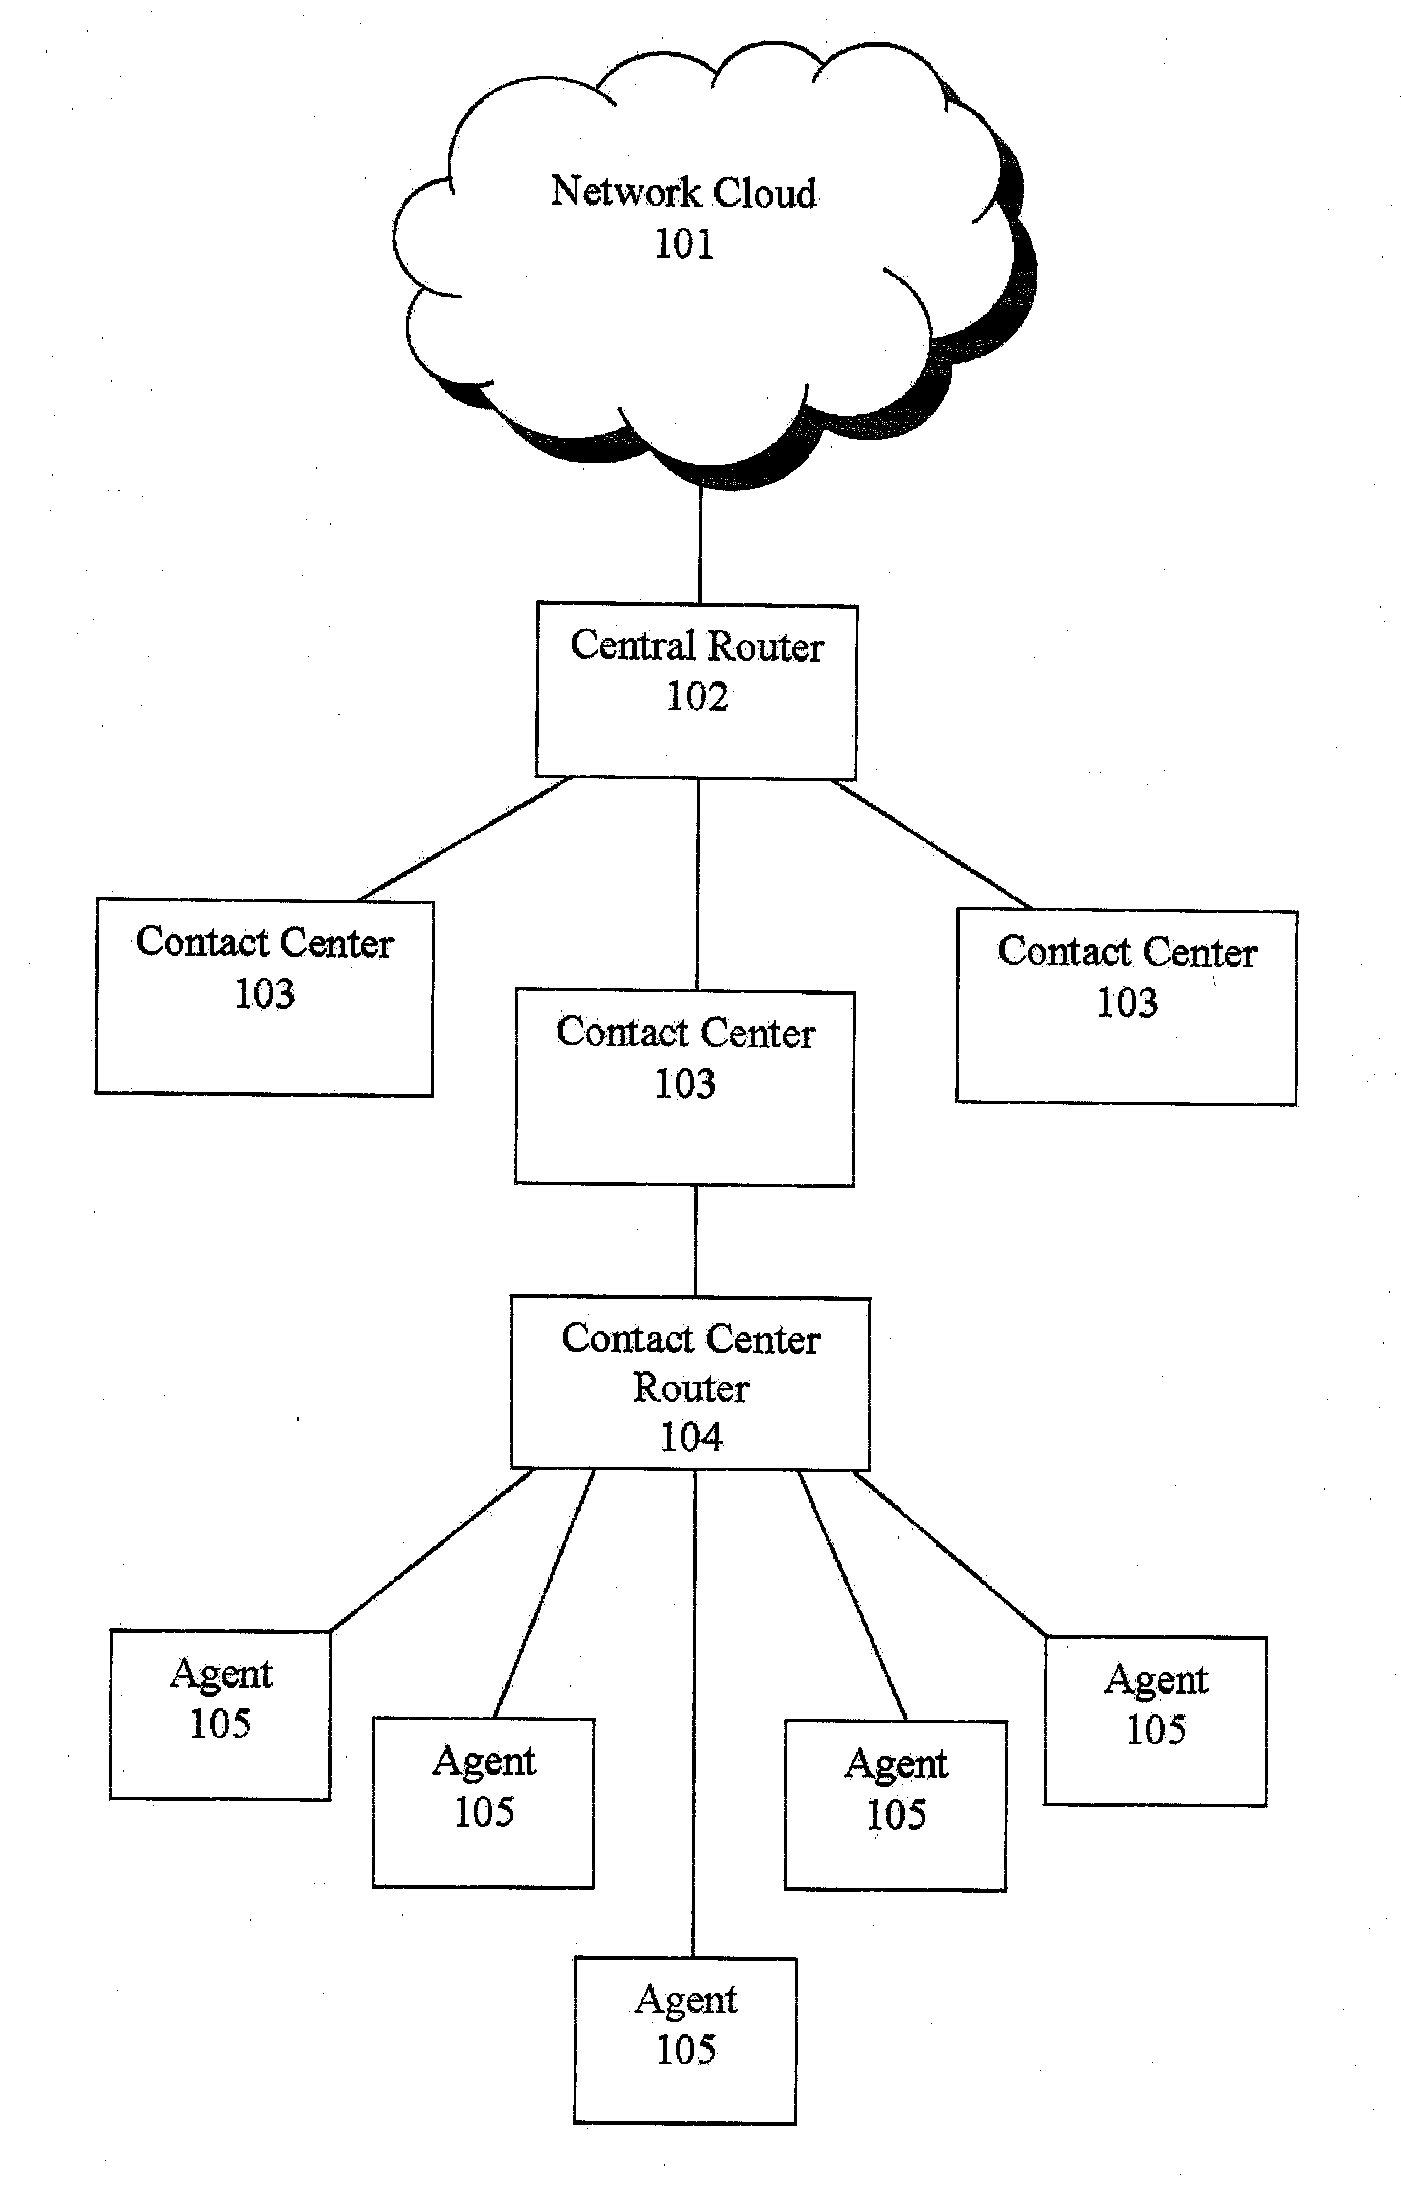 Pooling callers for a call center routing system